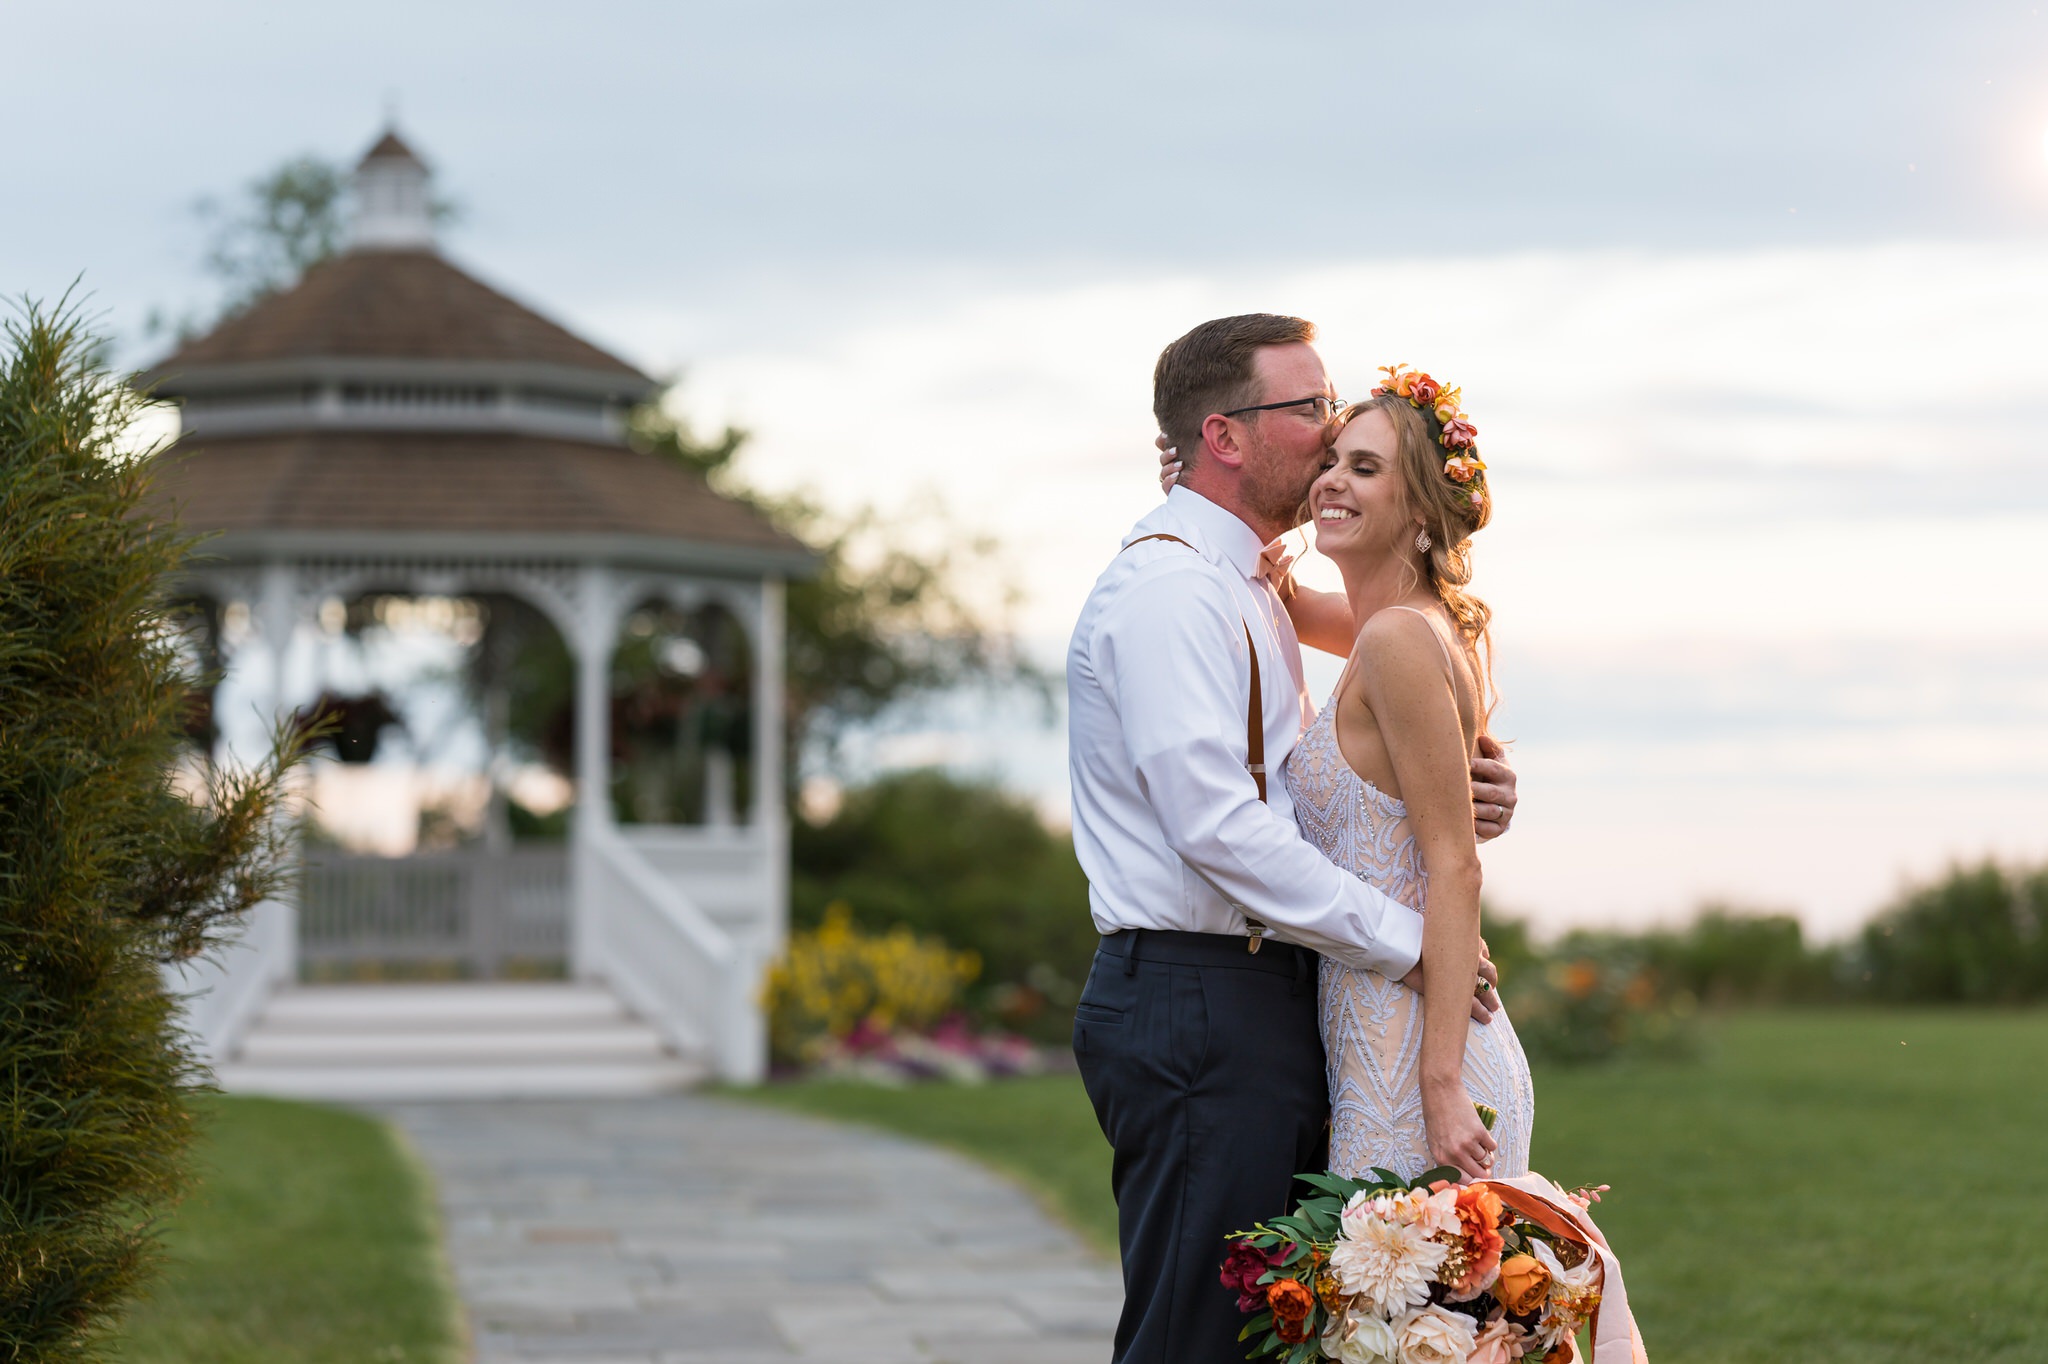 Standing with a gazebo in the background, a groom kisses the temple of his brade at their Mission Pointe Resort wedding.  